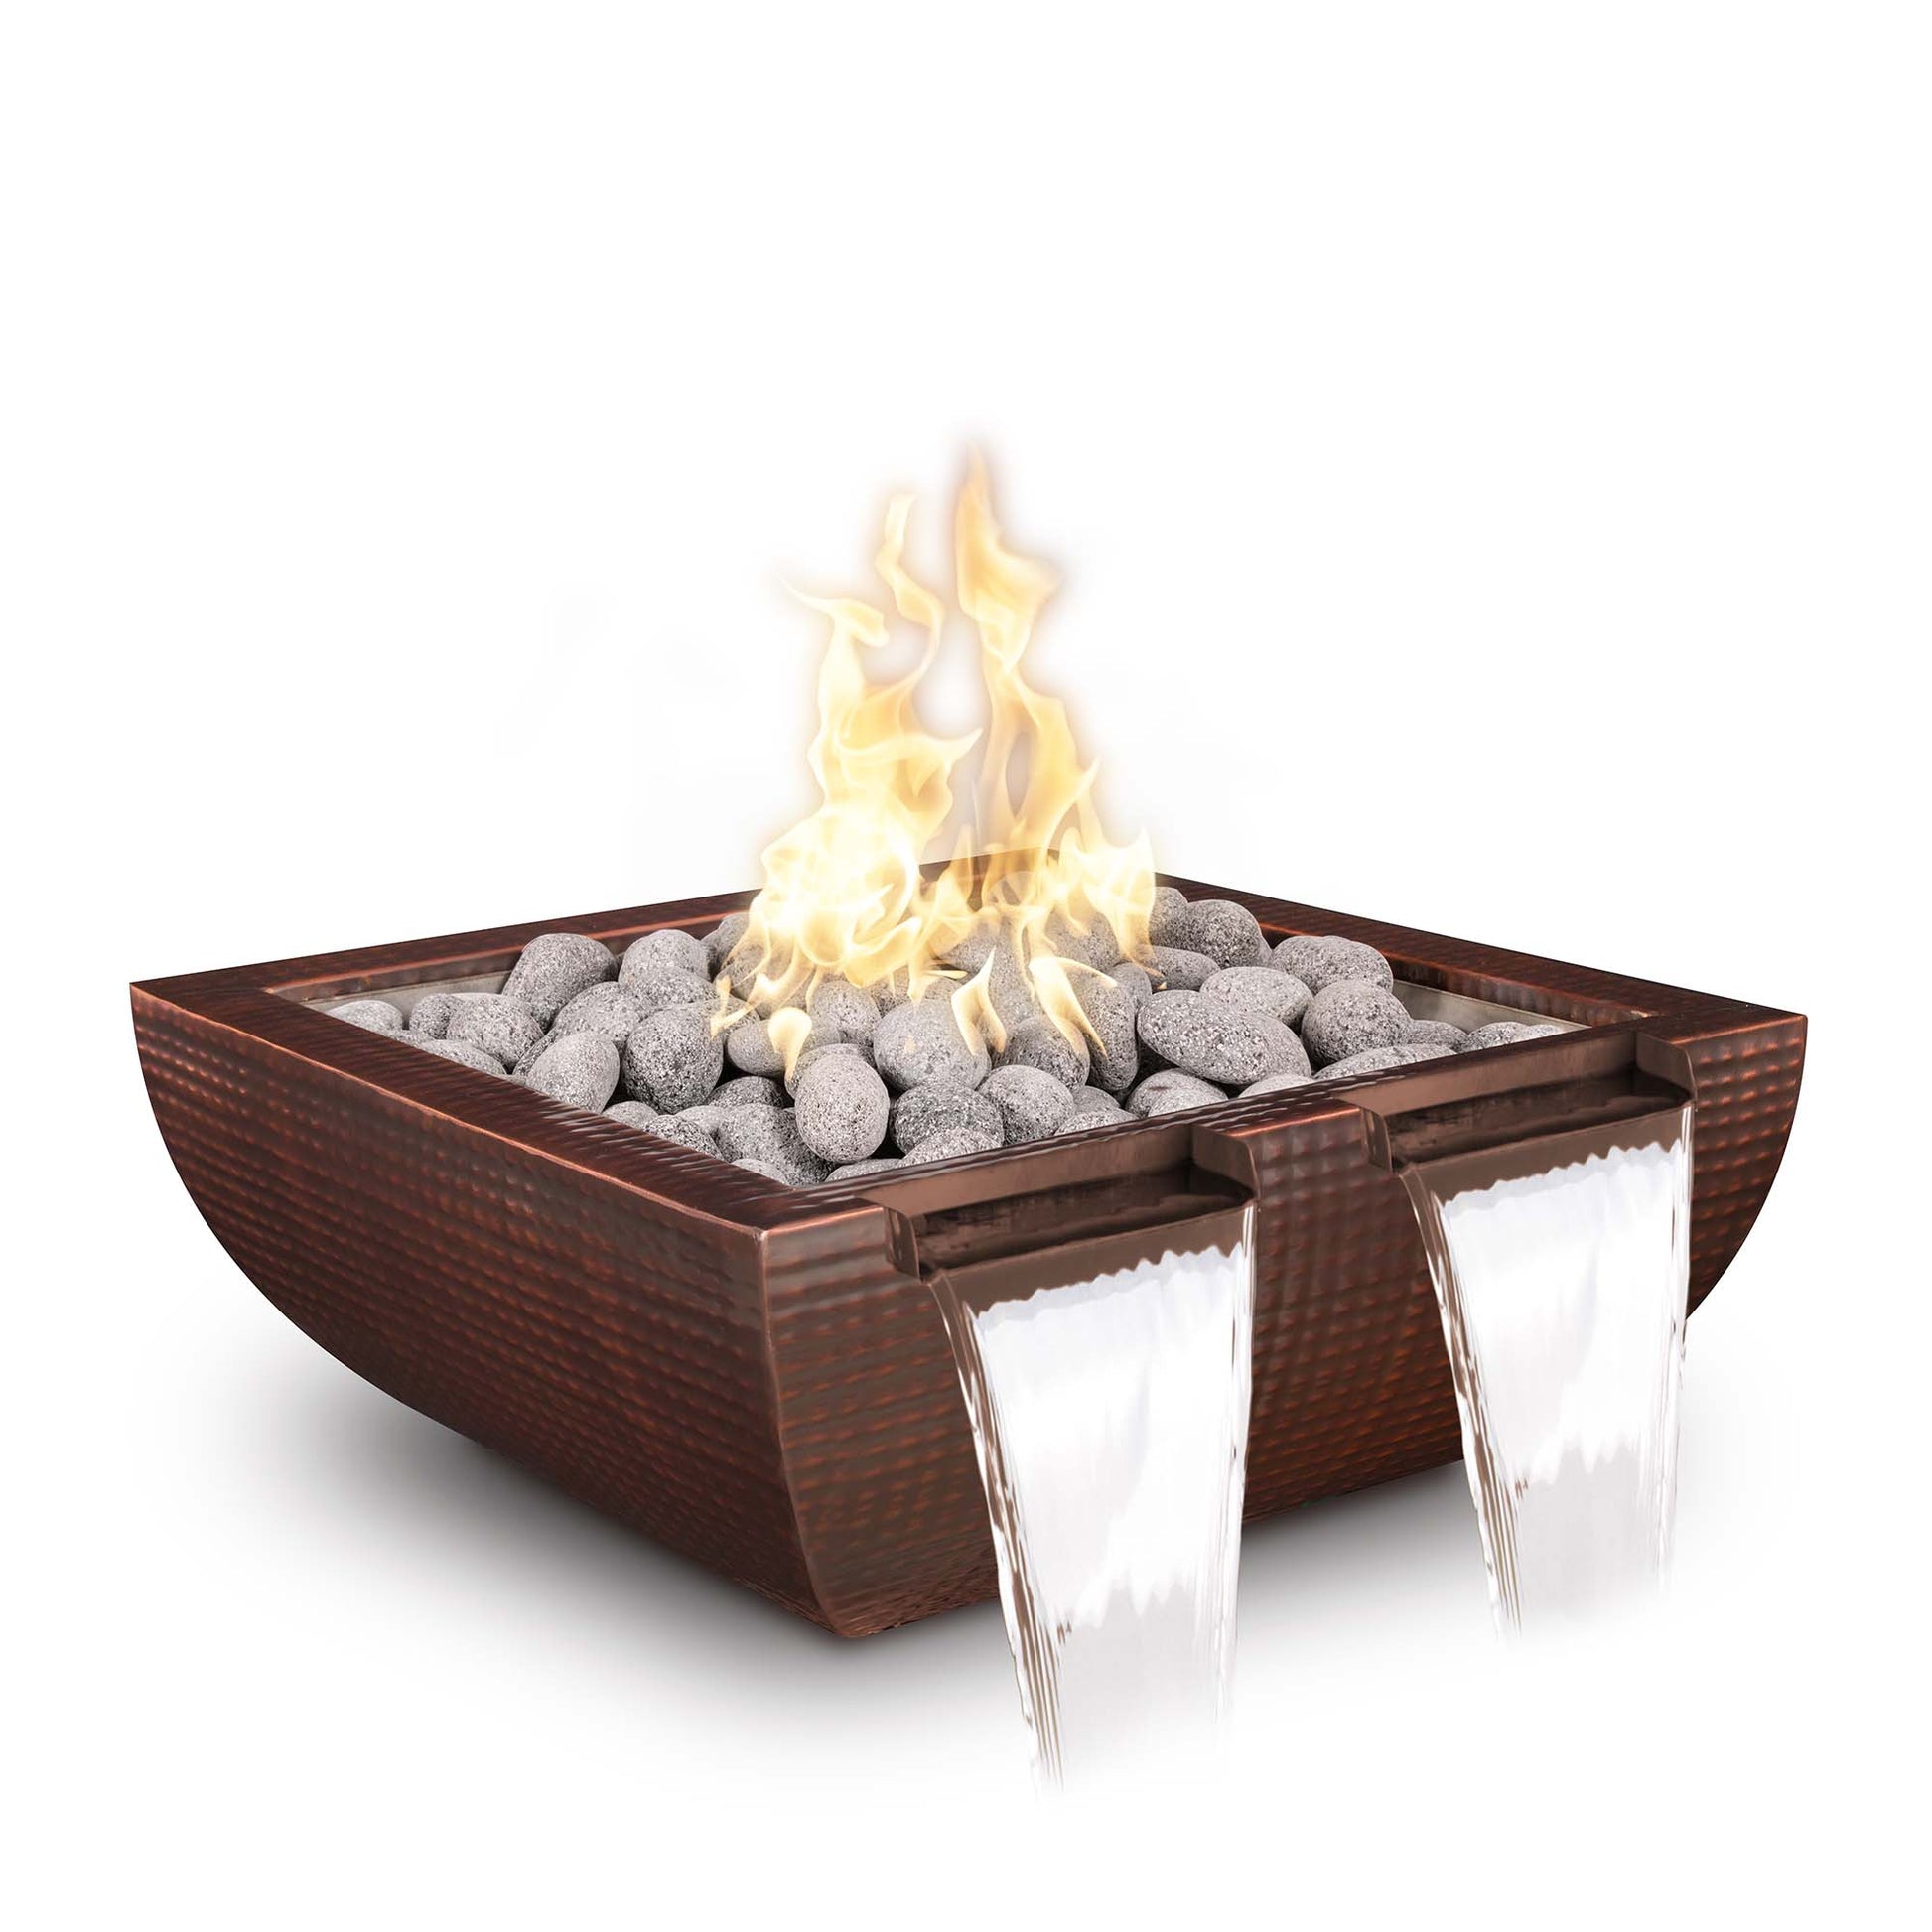 The Outdoor Plus Avalon Twin Spill 36" Black Powder Coated Metal Natural Gas Fire & Water Bowl with Match Lit Ignition